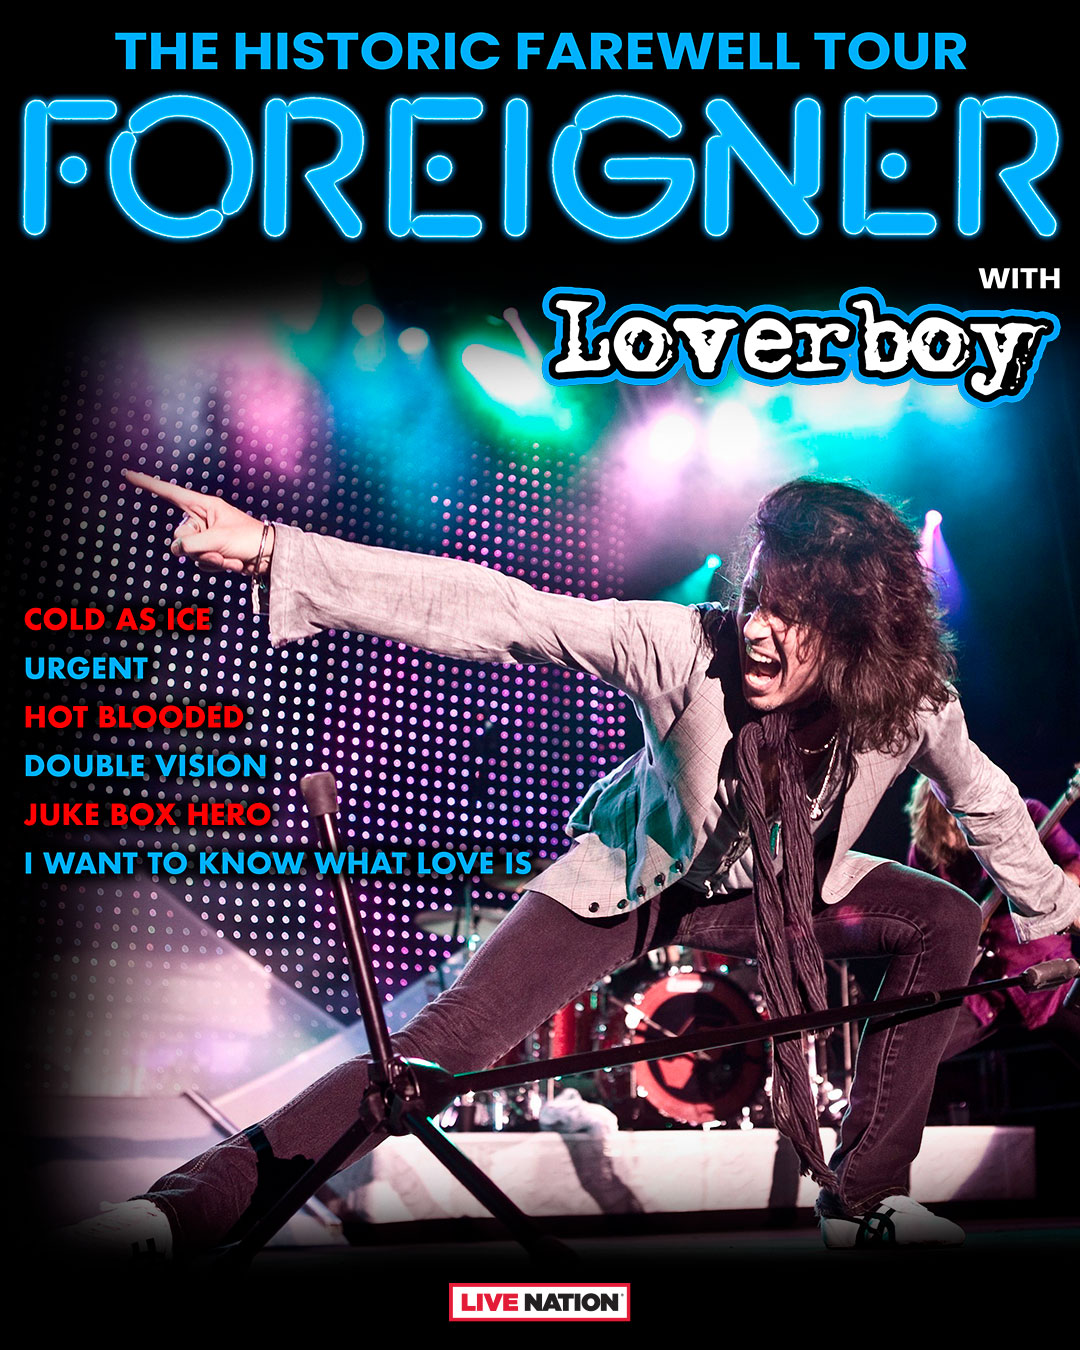 Foreigner and Loverboy Concert Tickets (Lawn) 2 for $40 in Multiple Cities July - Sept. 2023 at Costco.com